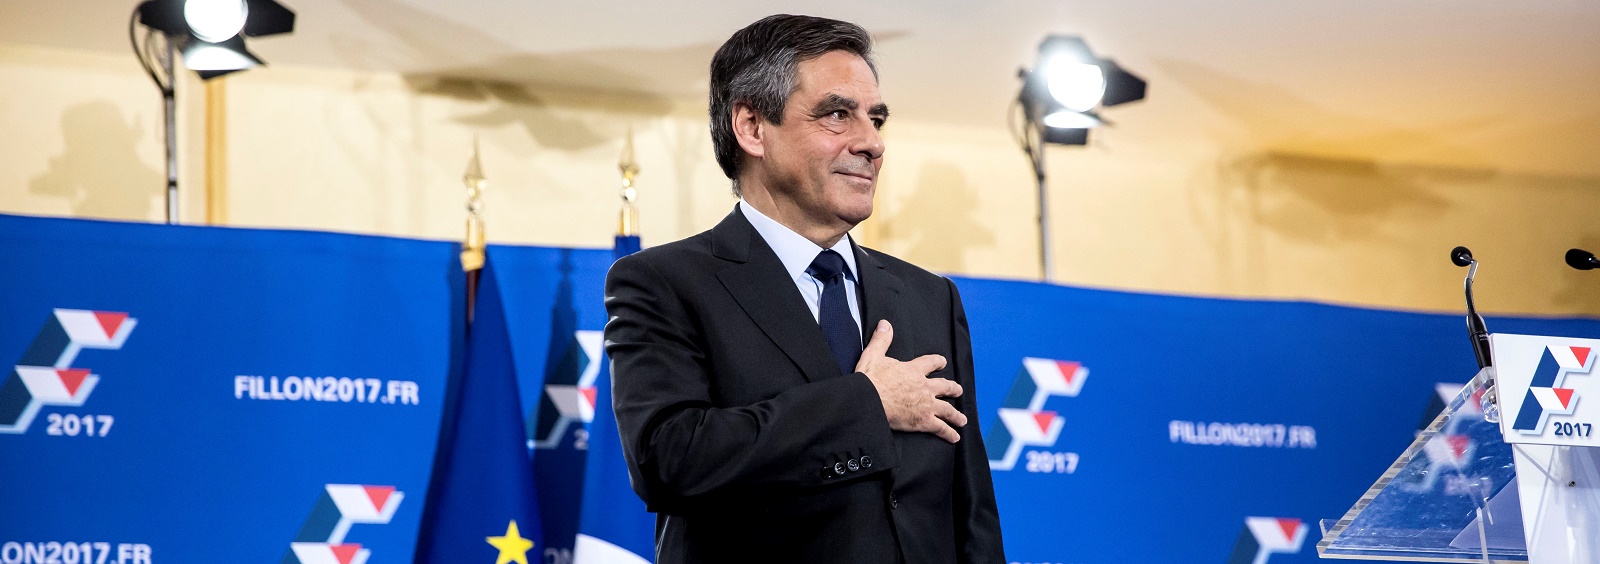 Francois Fillon after his victory in Les Republicains primary (Photo by Vincent Isore/IP3/Getty Images)